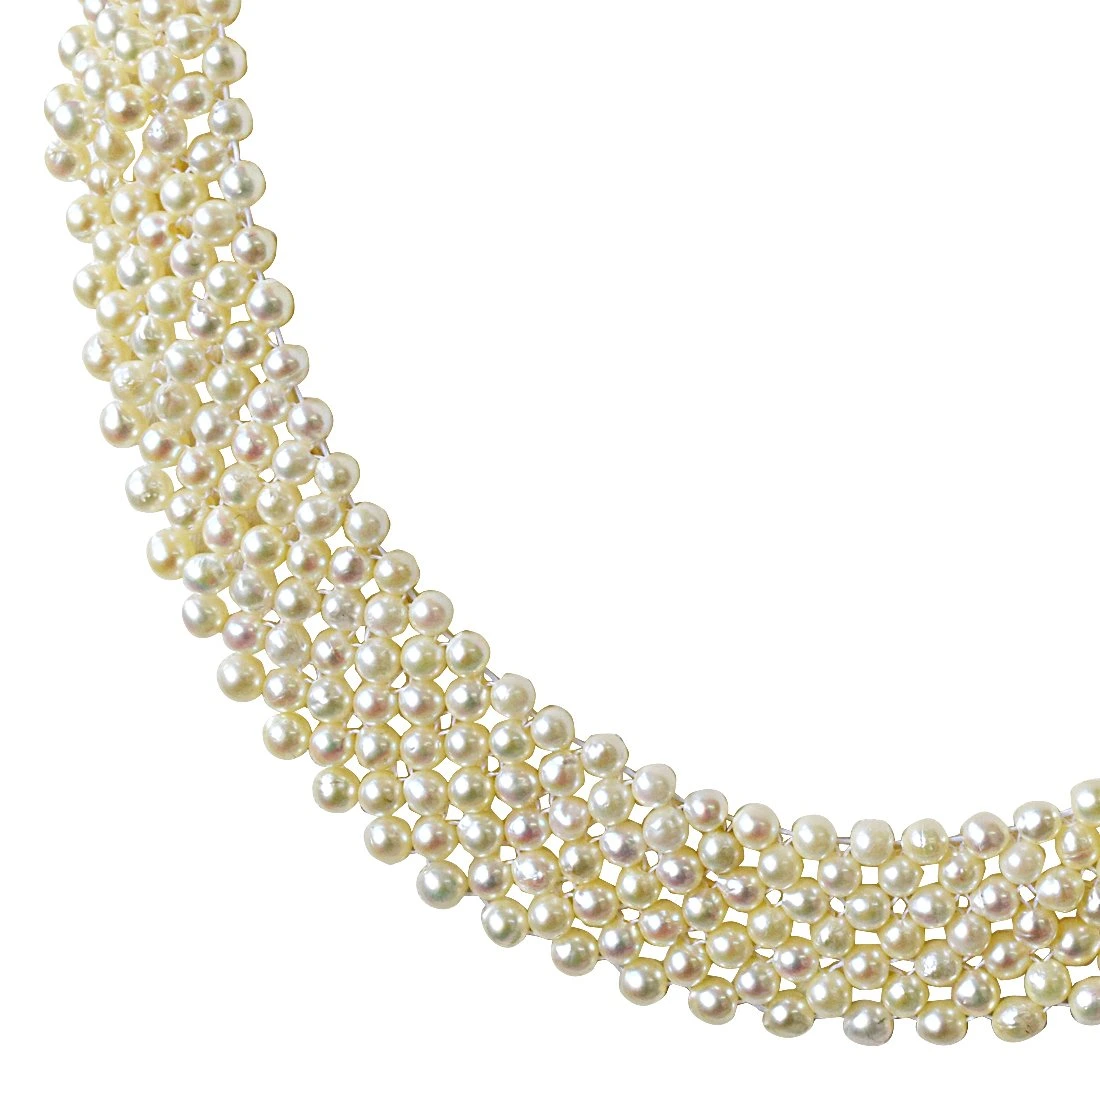 Fine Knitted Choker Real Japanese Akoya Cultured Pearl Necklace for Women, White Silky Smooth Pearls SN776